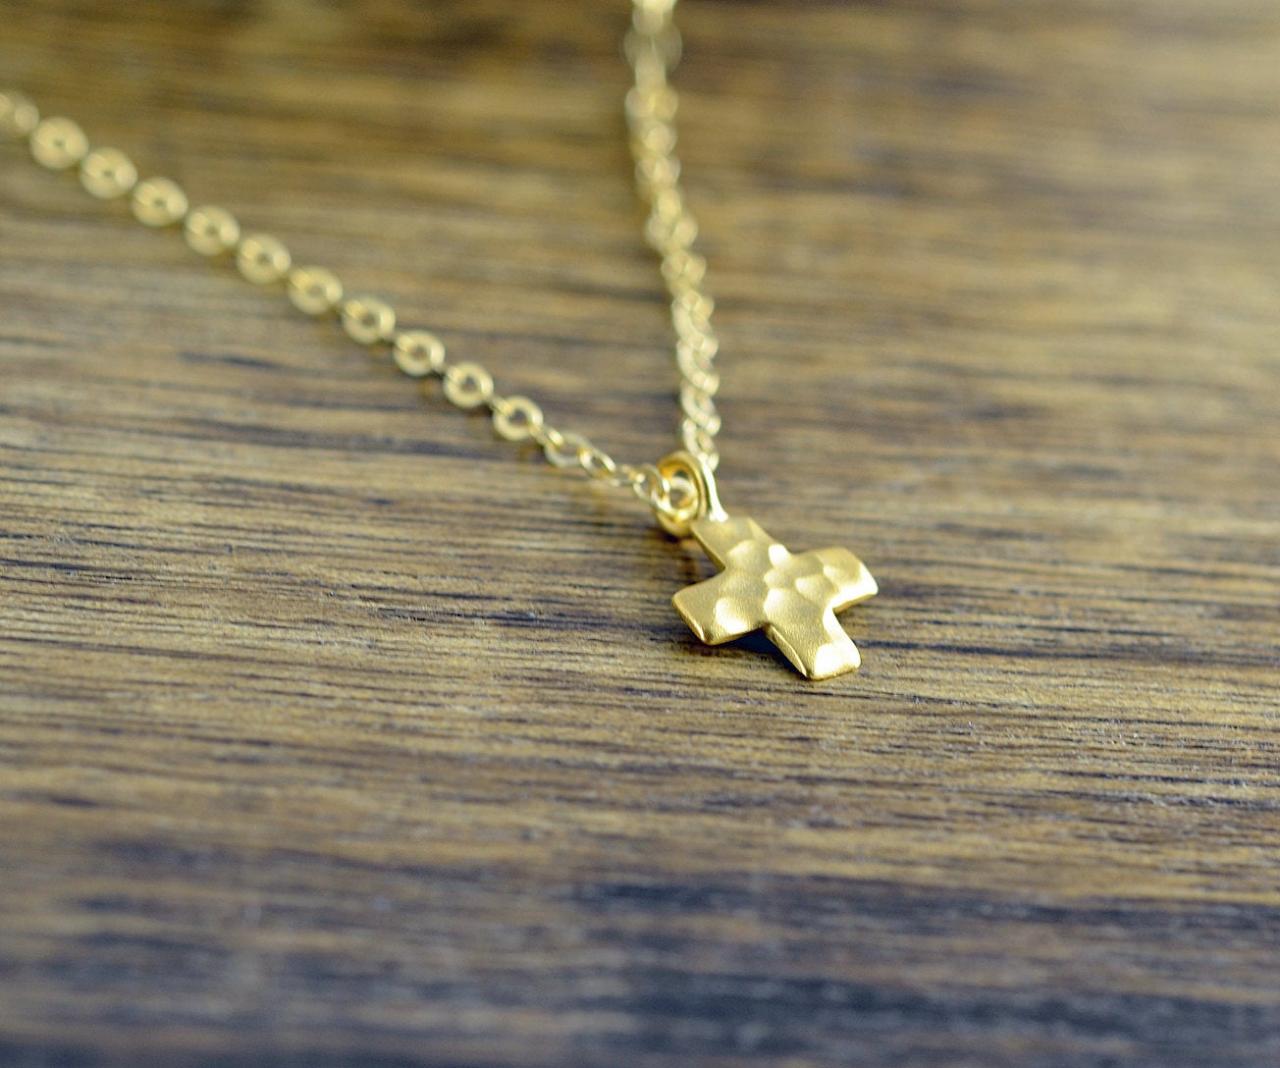 Gold Hammered Cross Necklace - Cross Necklace Women, Star Necklace, Cross Necklace, Protection Gift, Religious Gift